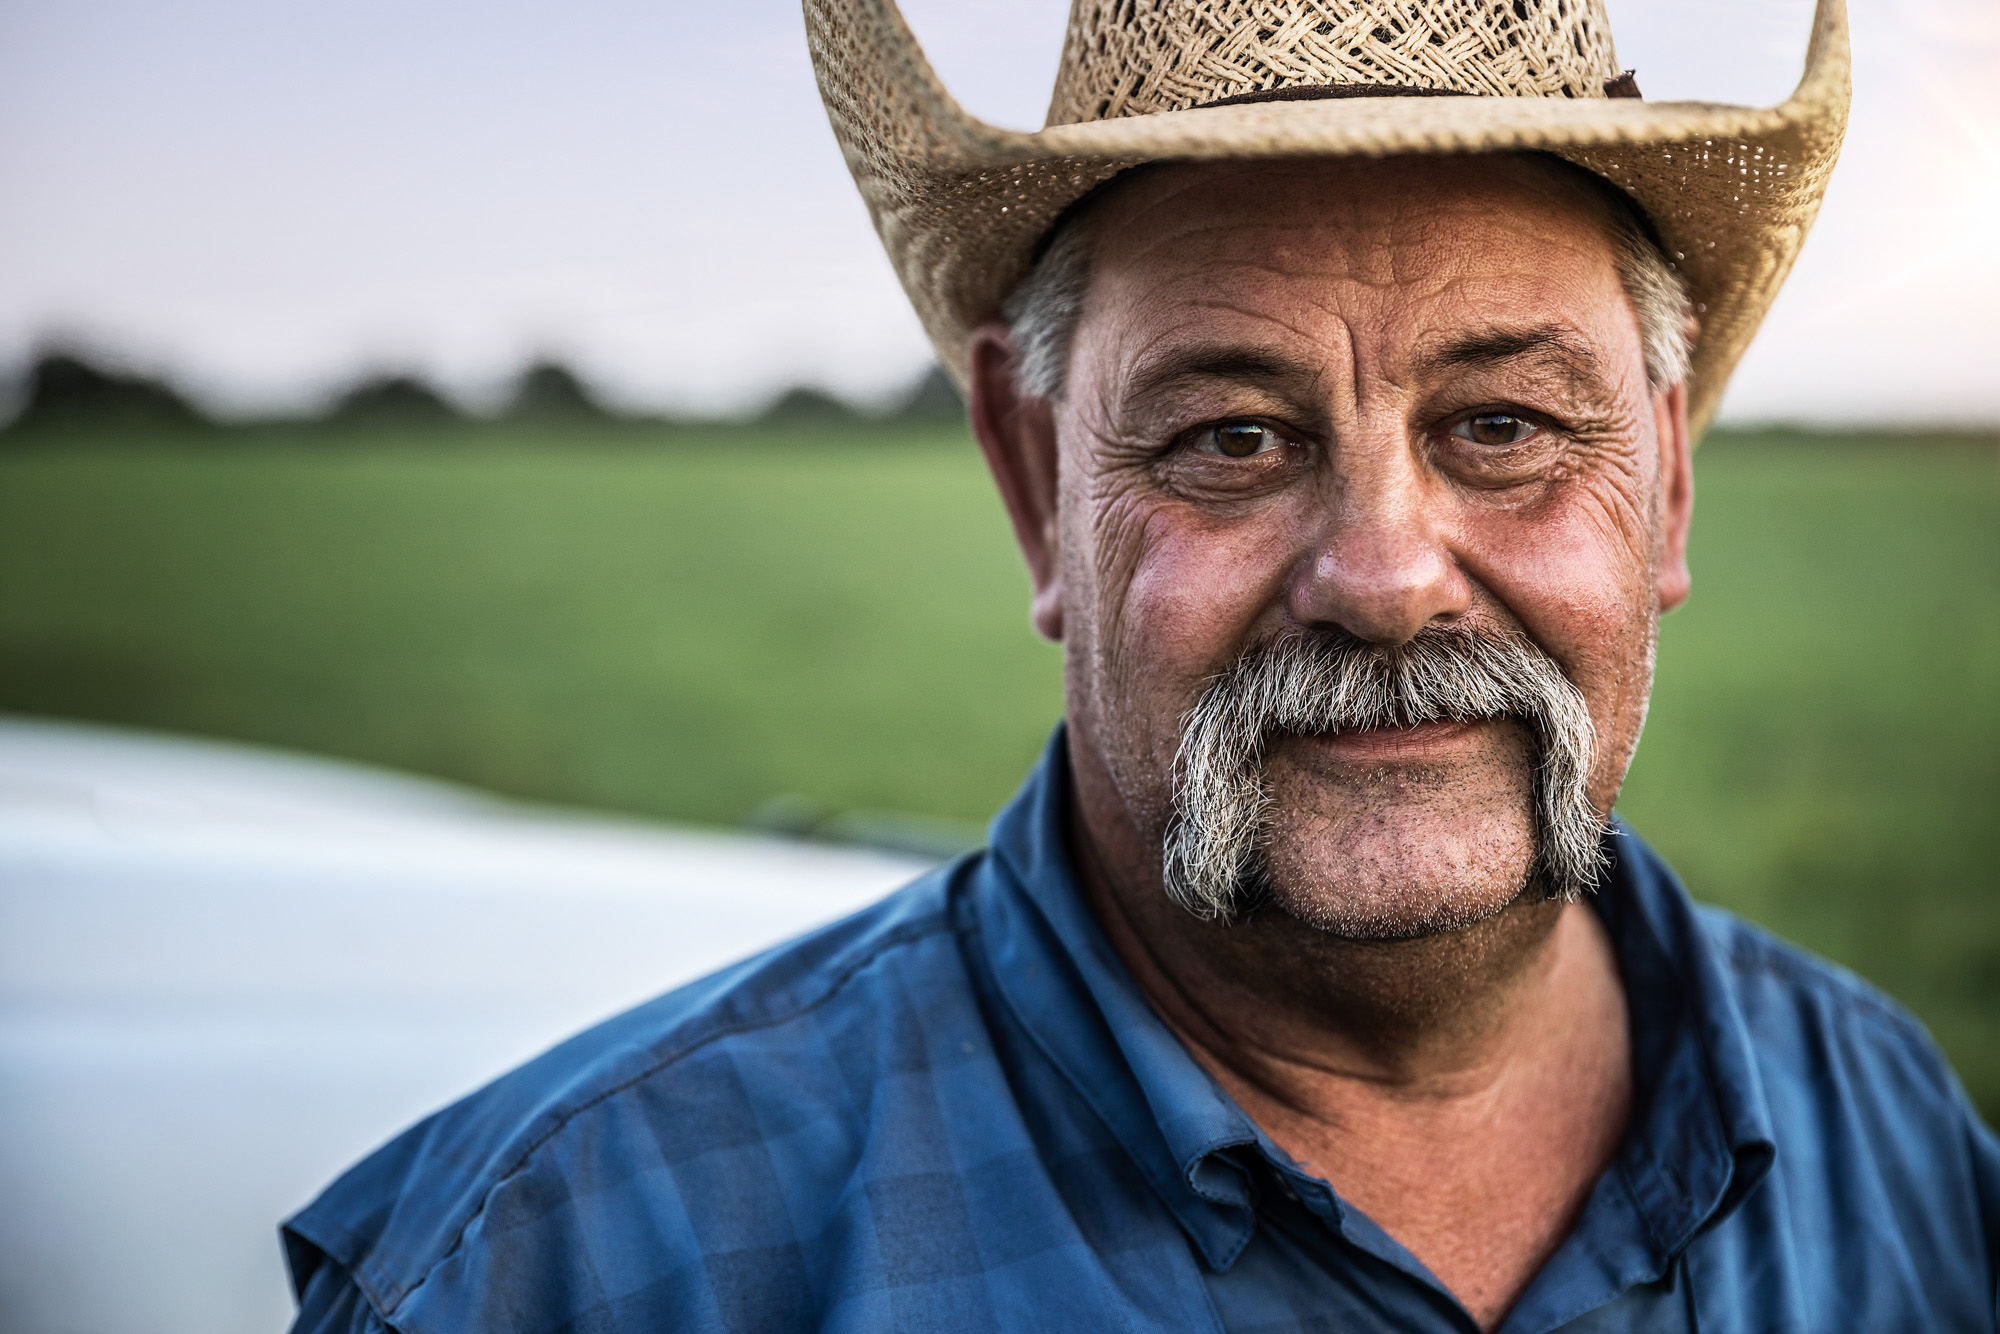 ranch worker portrait at sunset sunrise beauty light close up of face portrait with cowboy hat and mustache